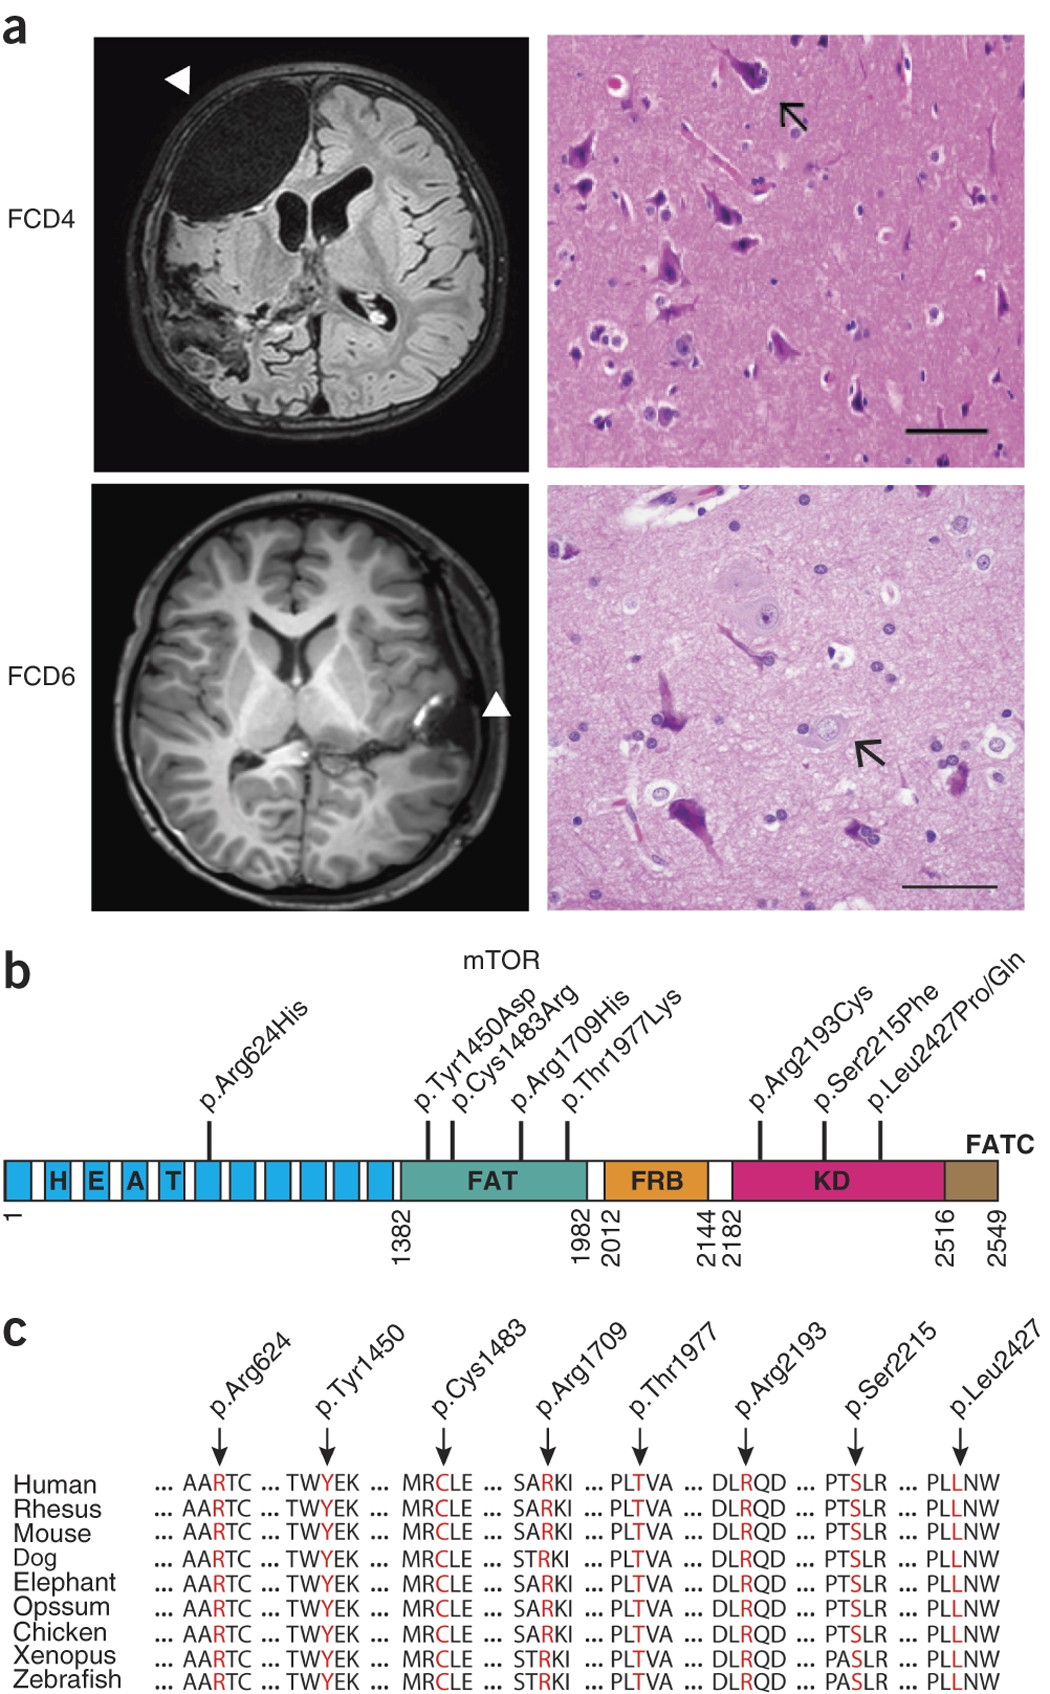 Brain somatic mutations in MTOR cause focal cortical dysplasia type II  leading to intractable epilepsy | Nature Medicine